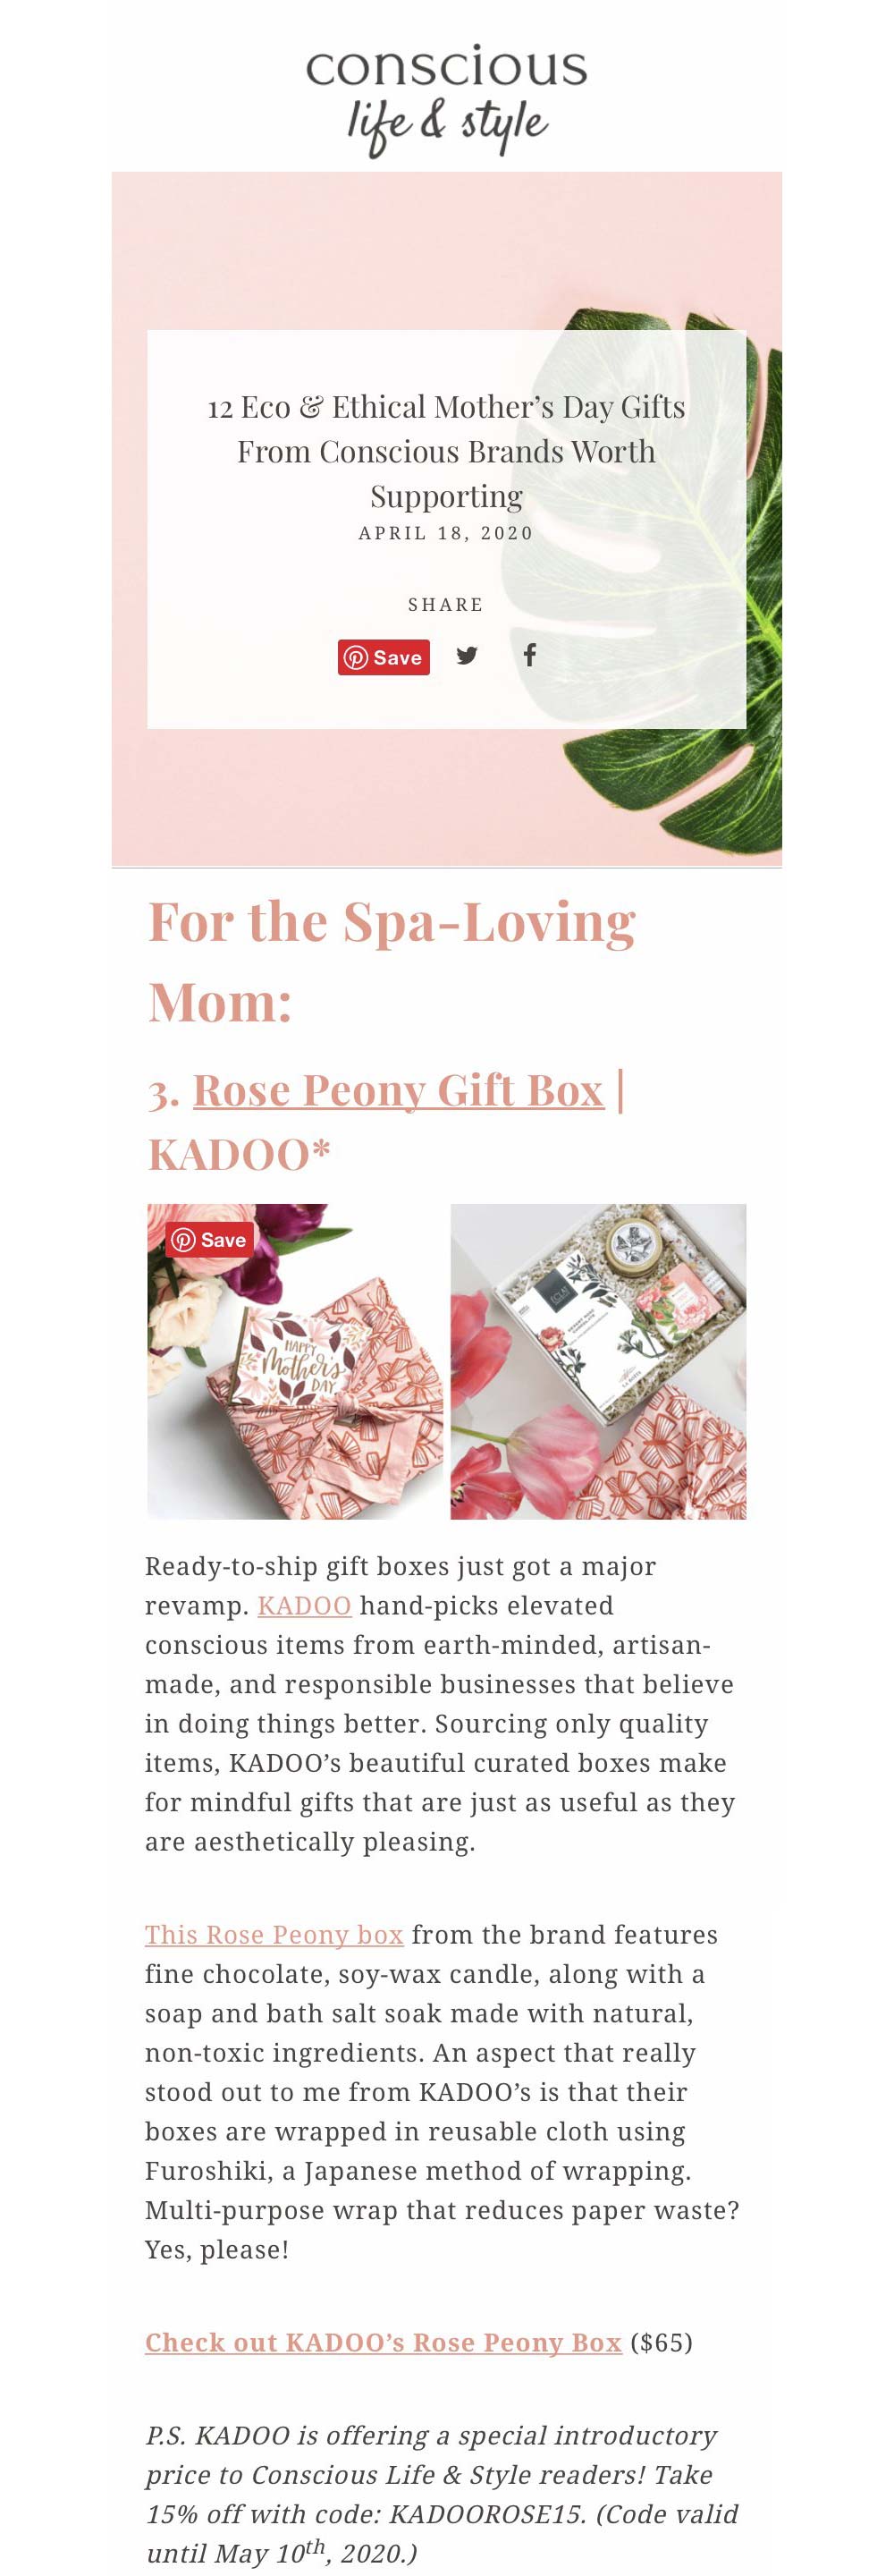 kadoo Conscious Life and Style Eco & Ethical Mother's Day Gifts for the spa-loving mom.